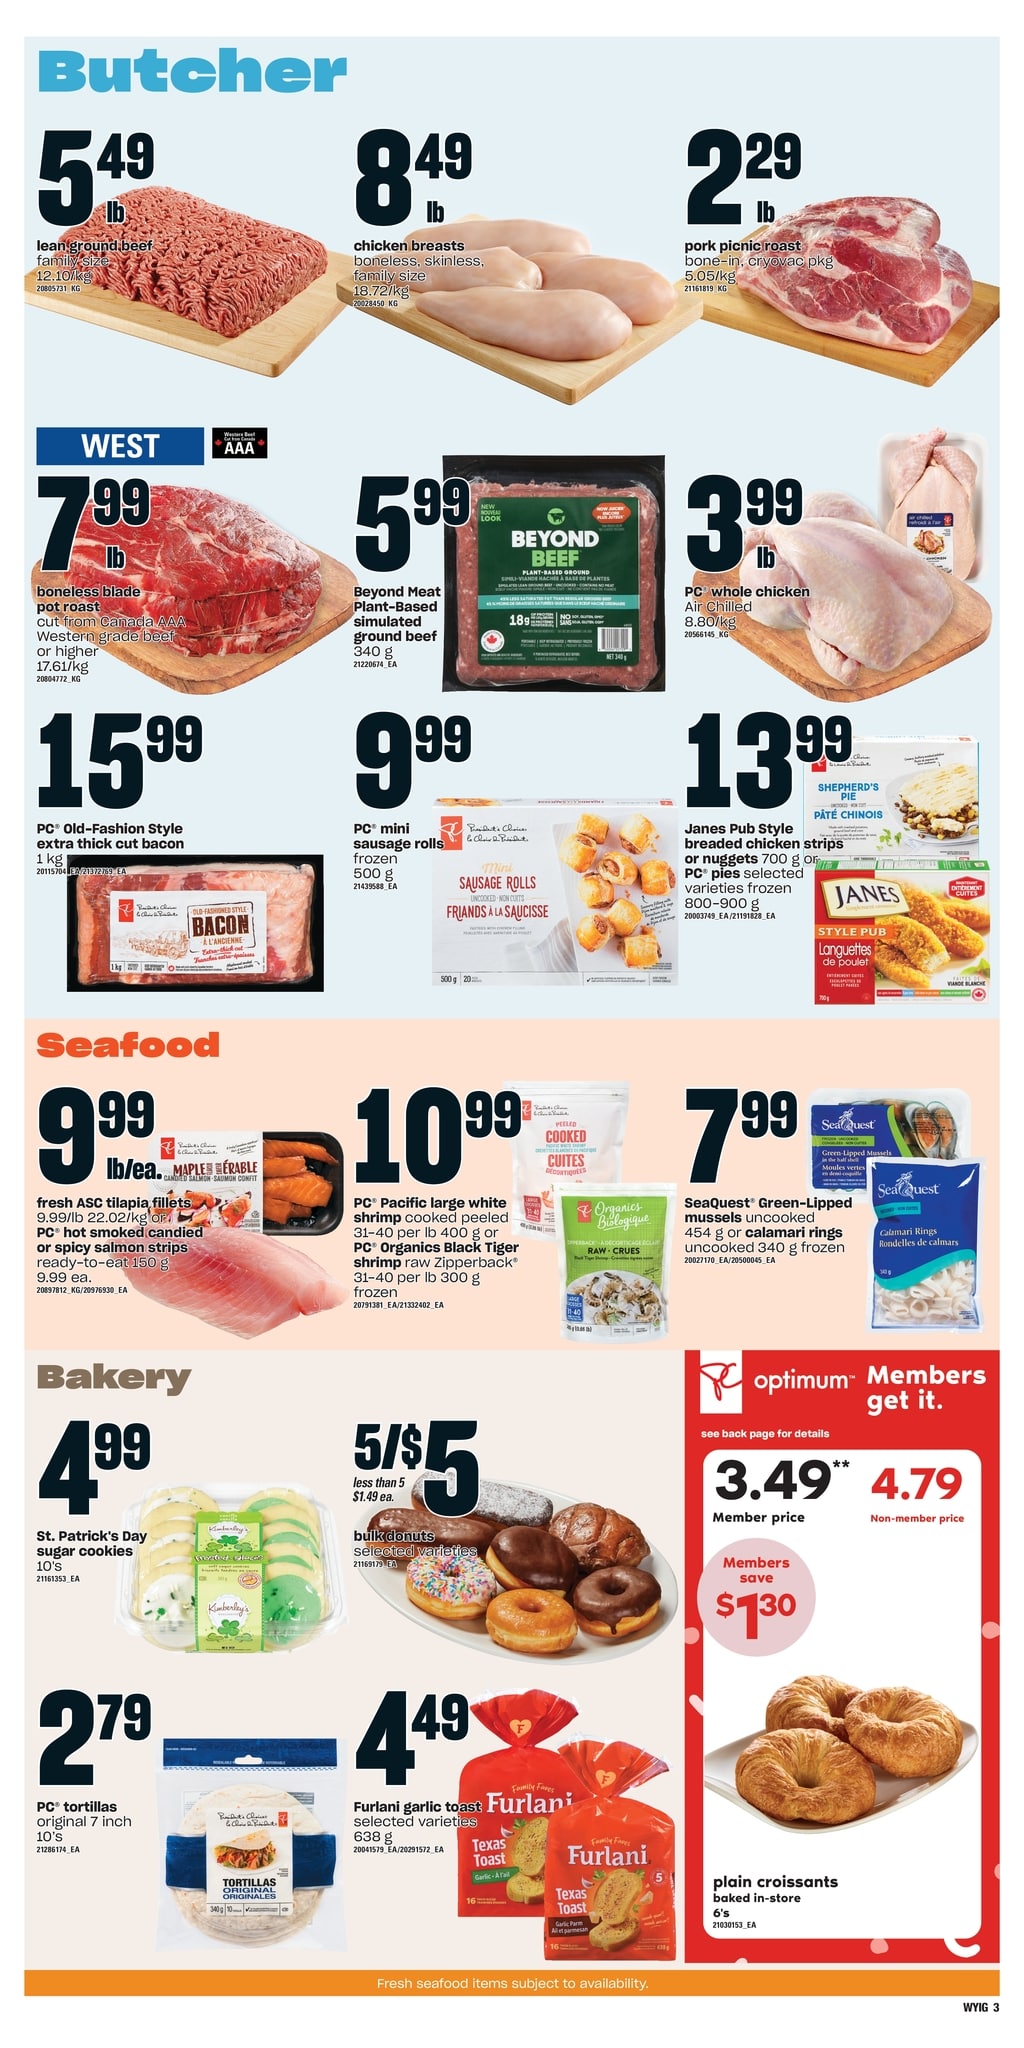 Independent - Western Canada - Weekly Flyer Specials - Page 6